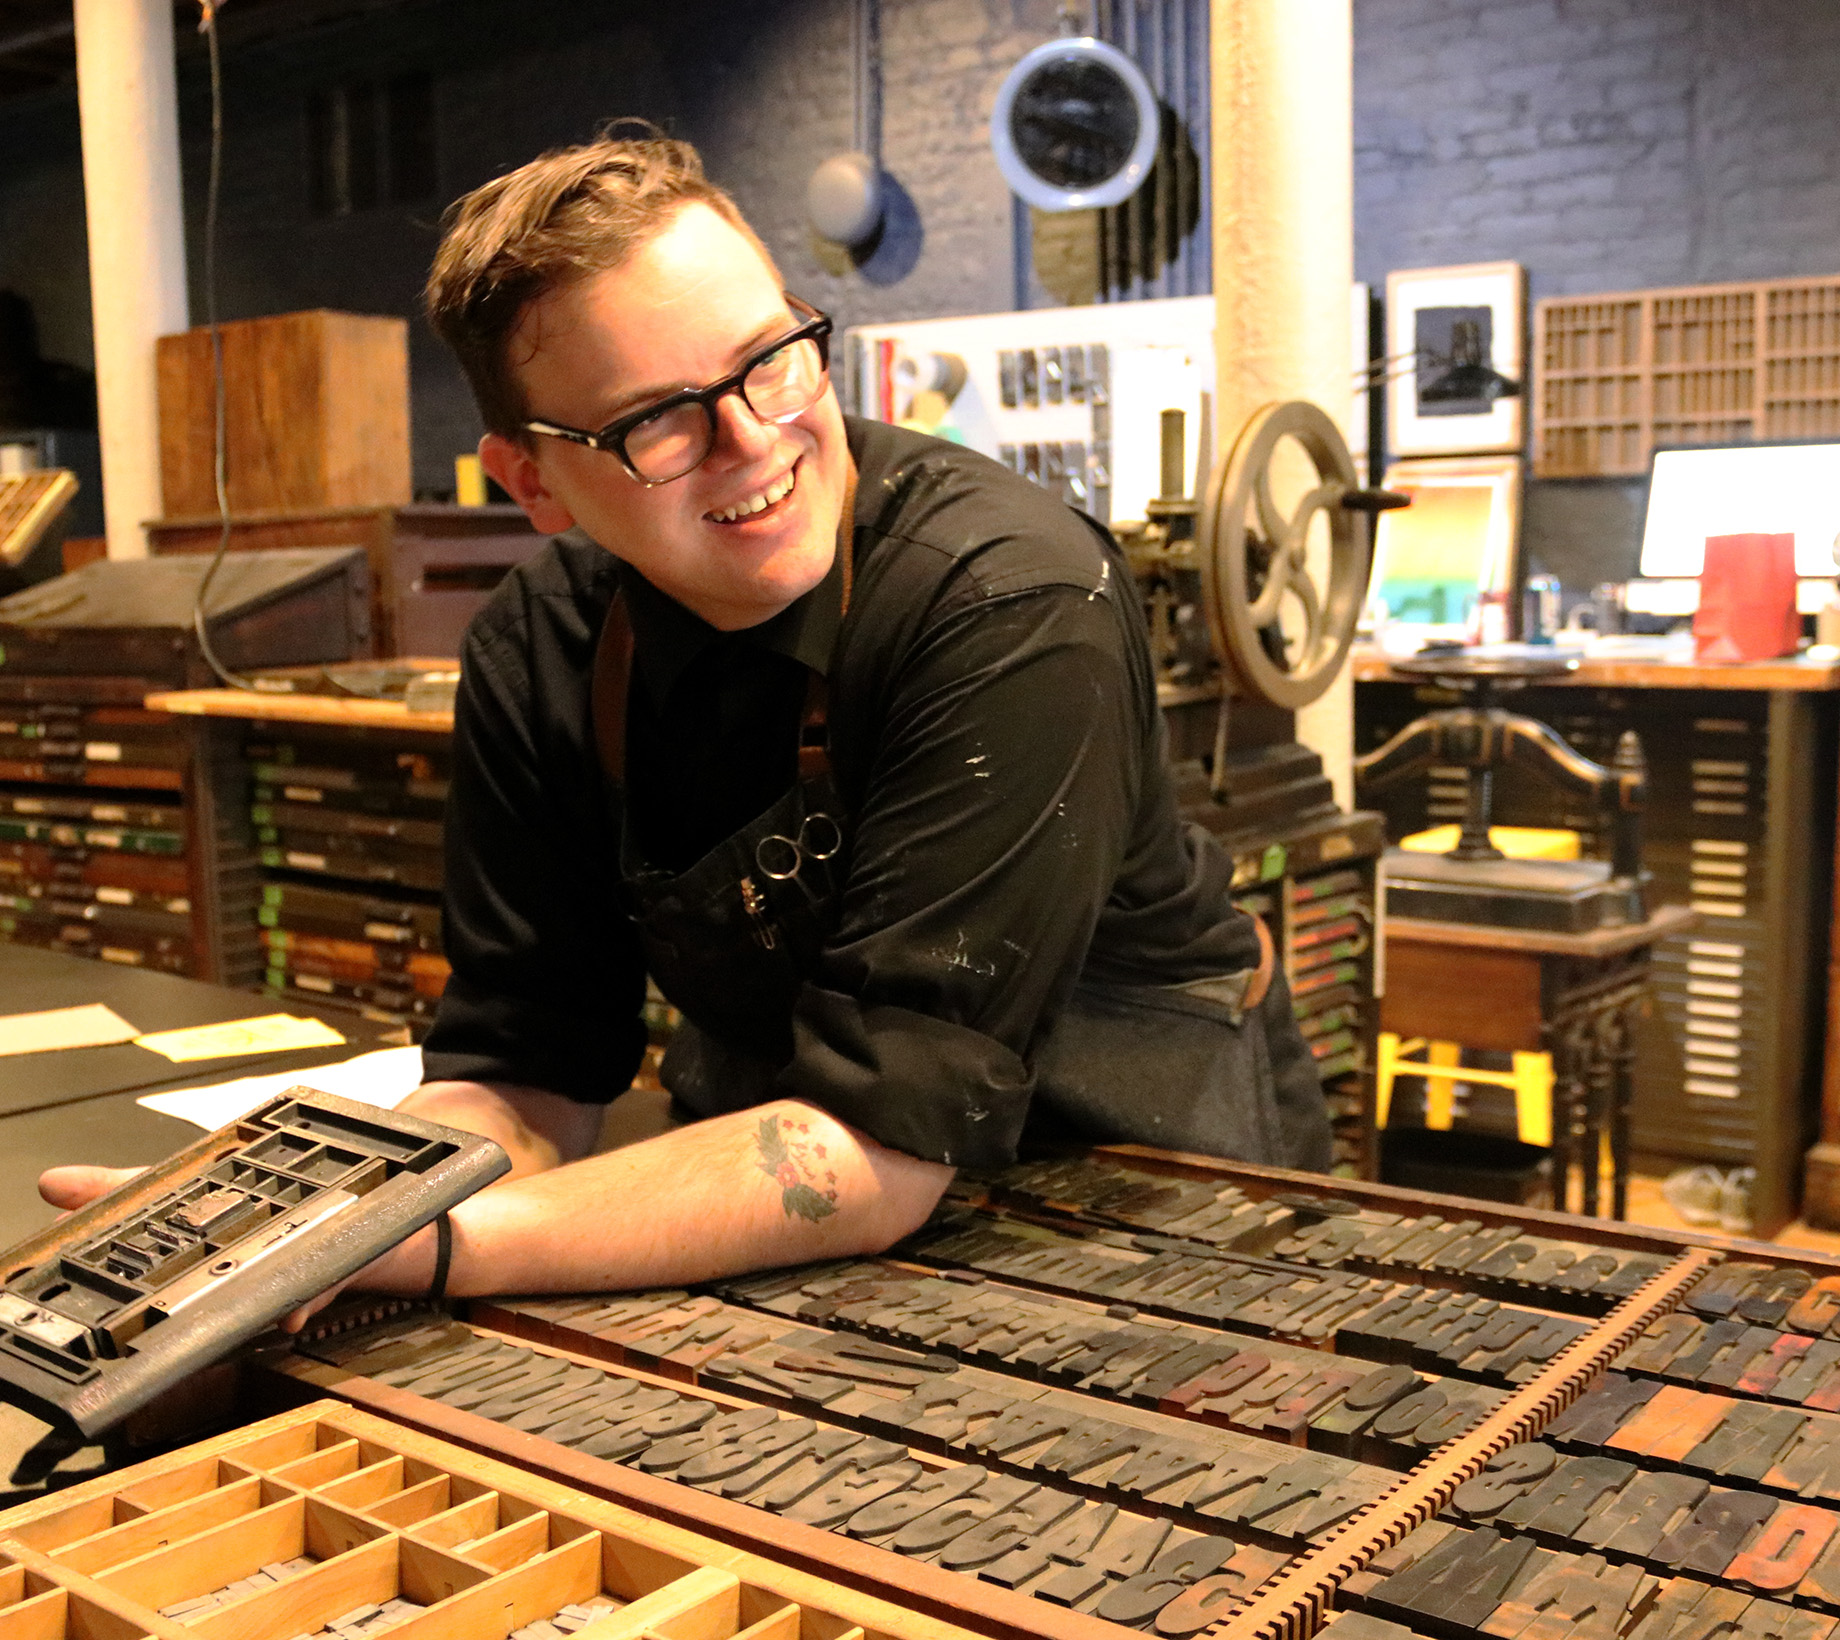 Explore New York’s Publishing History With A Bowne & Co. Talk On The Letterpress